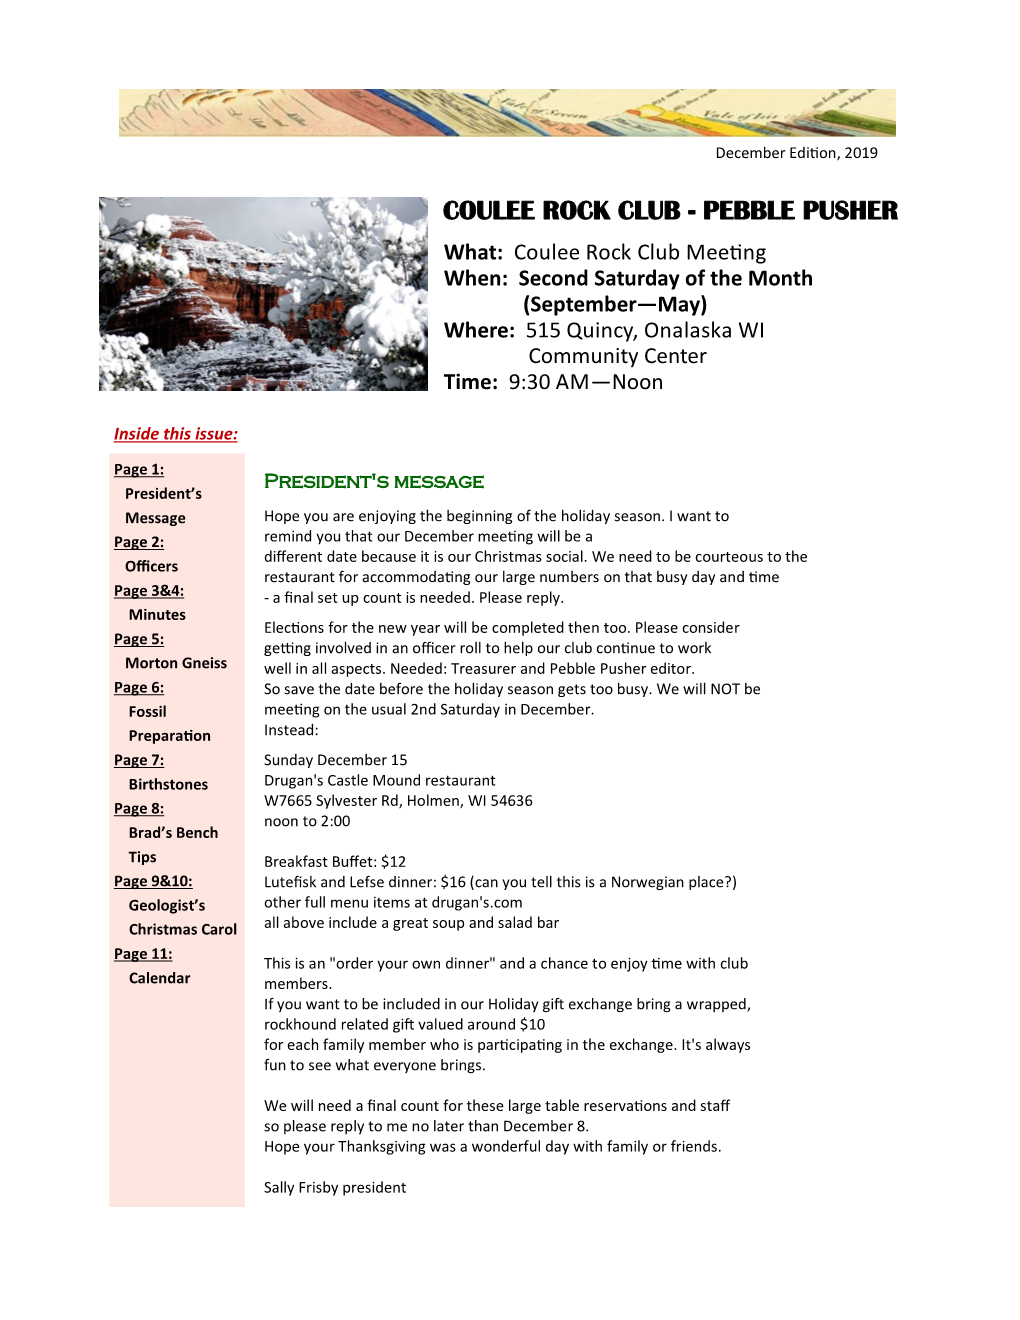 Coulee Rock Club